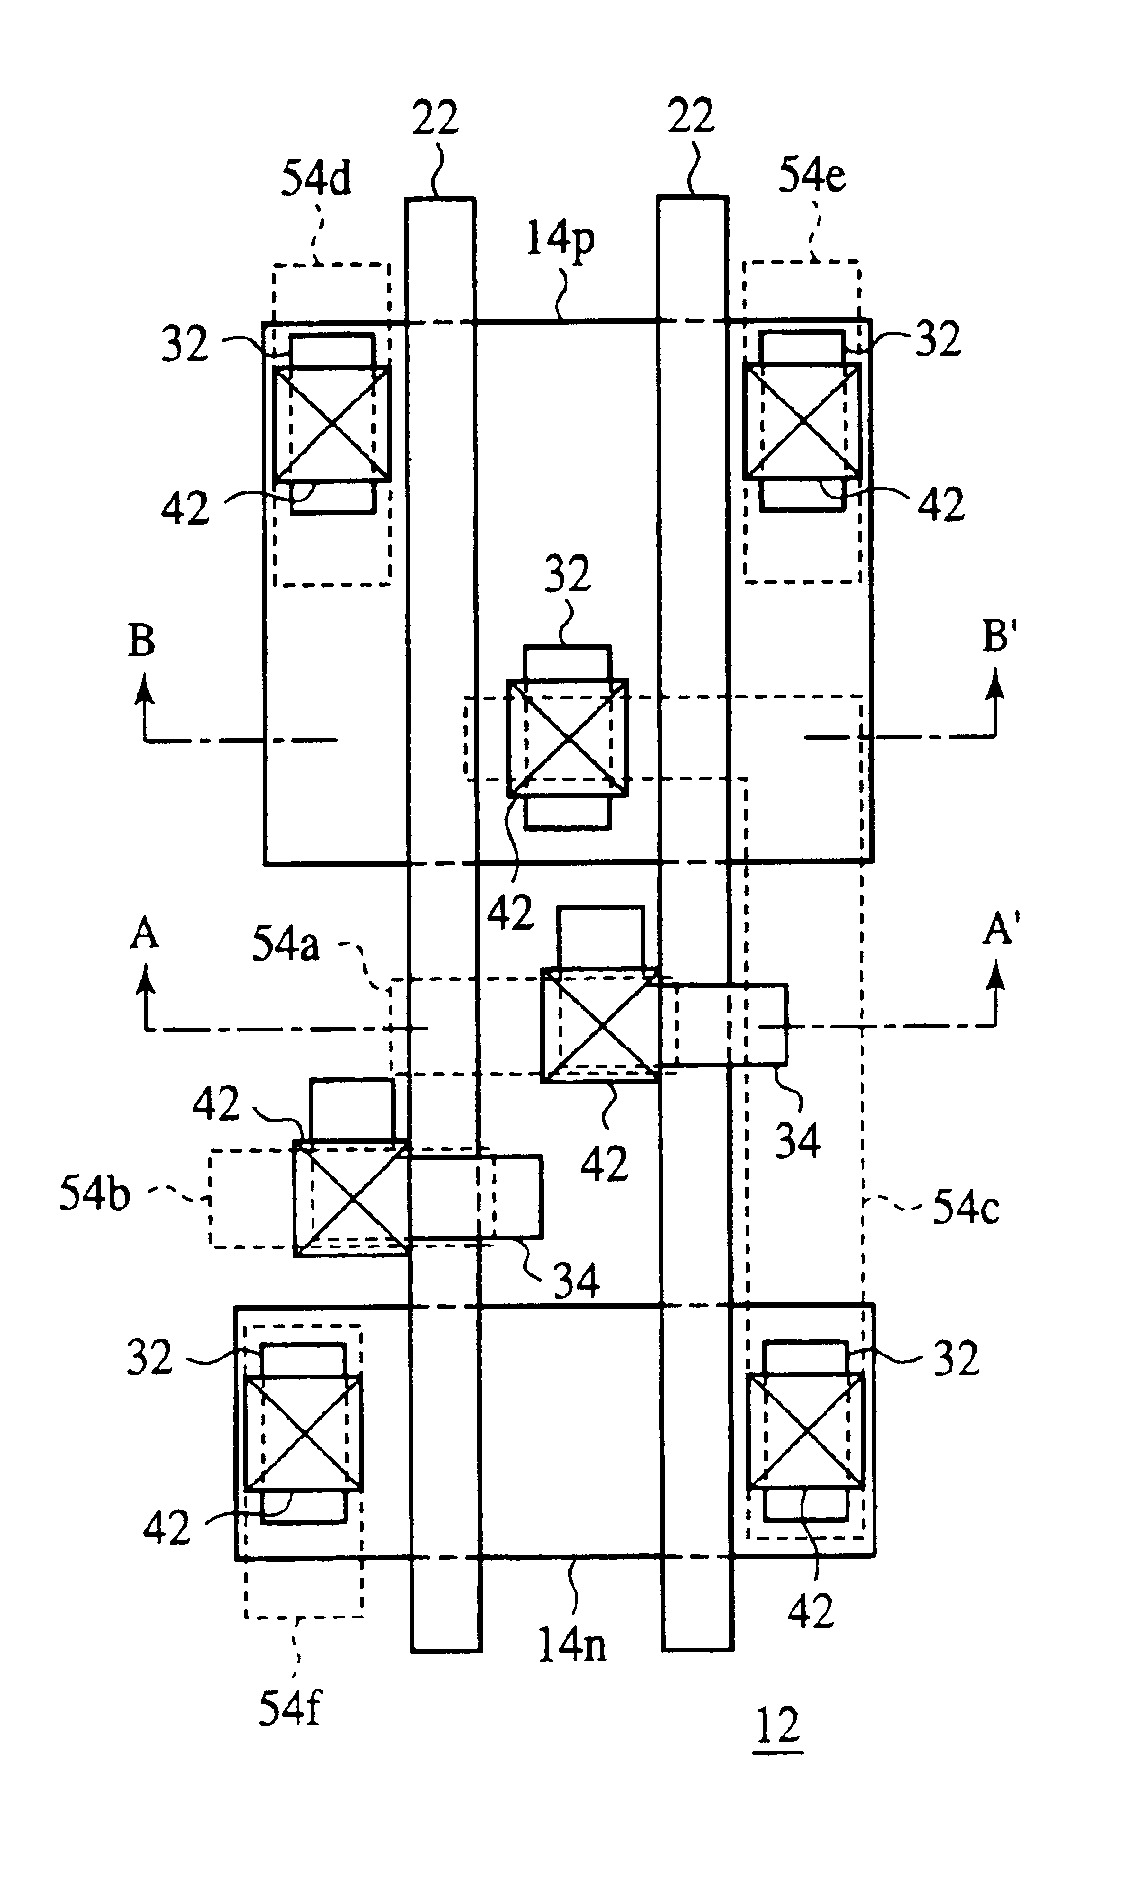 Semiconductor device including an electrical contact connected to an interconnection